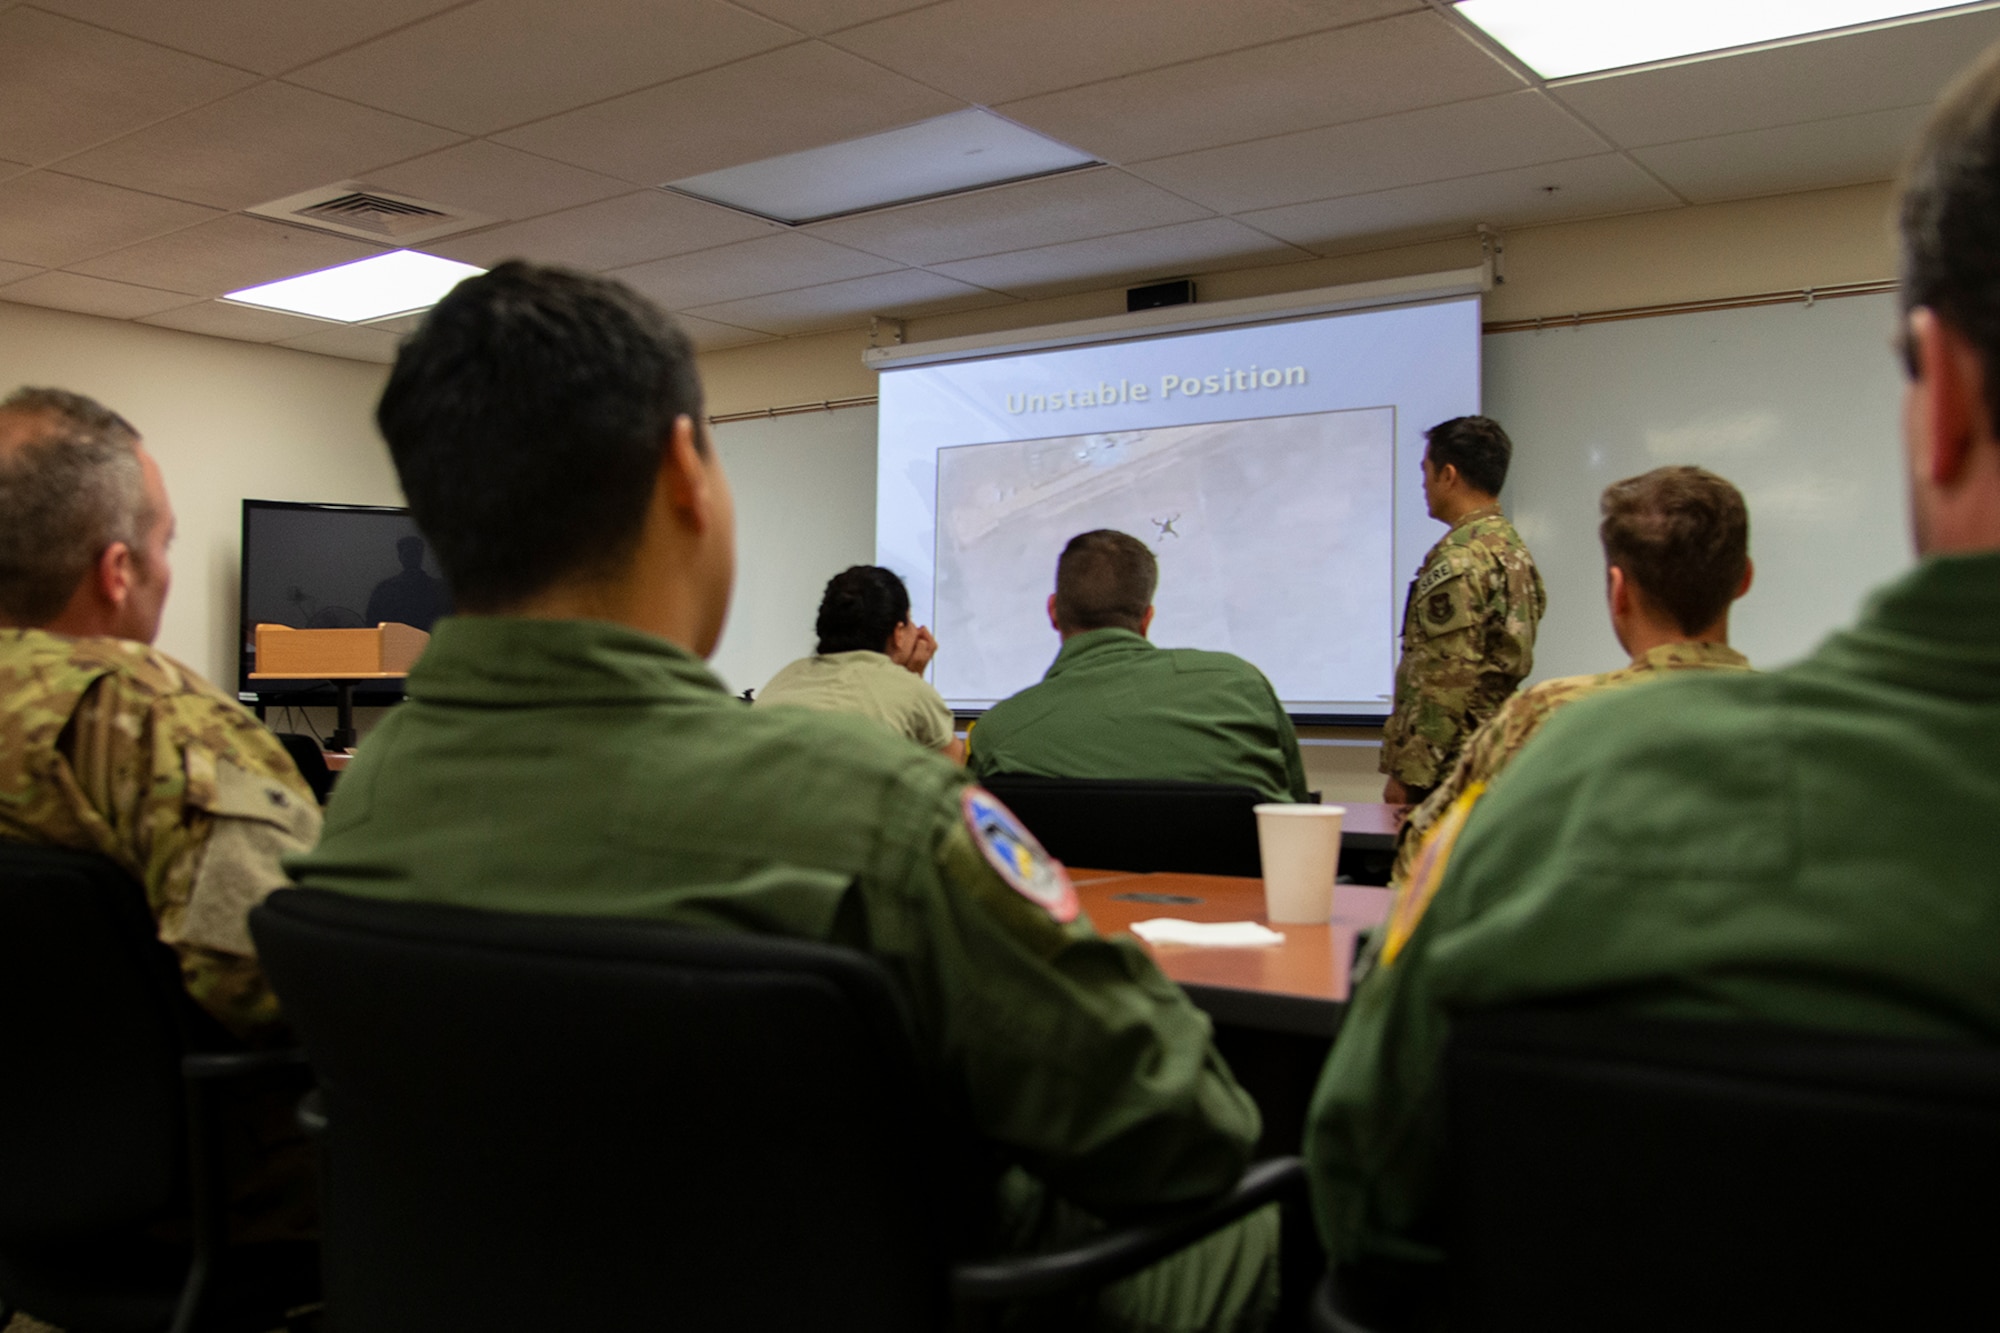 Tech. Sgt. Tony Fancher, a 302nd Airlift Wing Survival Evasion Resistance and Escape instructor, goes over emergency parachute procedures with members of the 731st Airlift Squadron and 34th Aeromedical Evacuation Squadron during a three-day Survival Evasion Resistance and Escape refresher training in Key West, Florida, May 23, 2019. (U.S. Air Force photo by Tech. Sgt. Frank Casciotta)